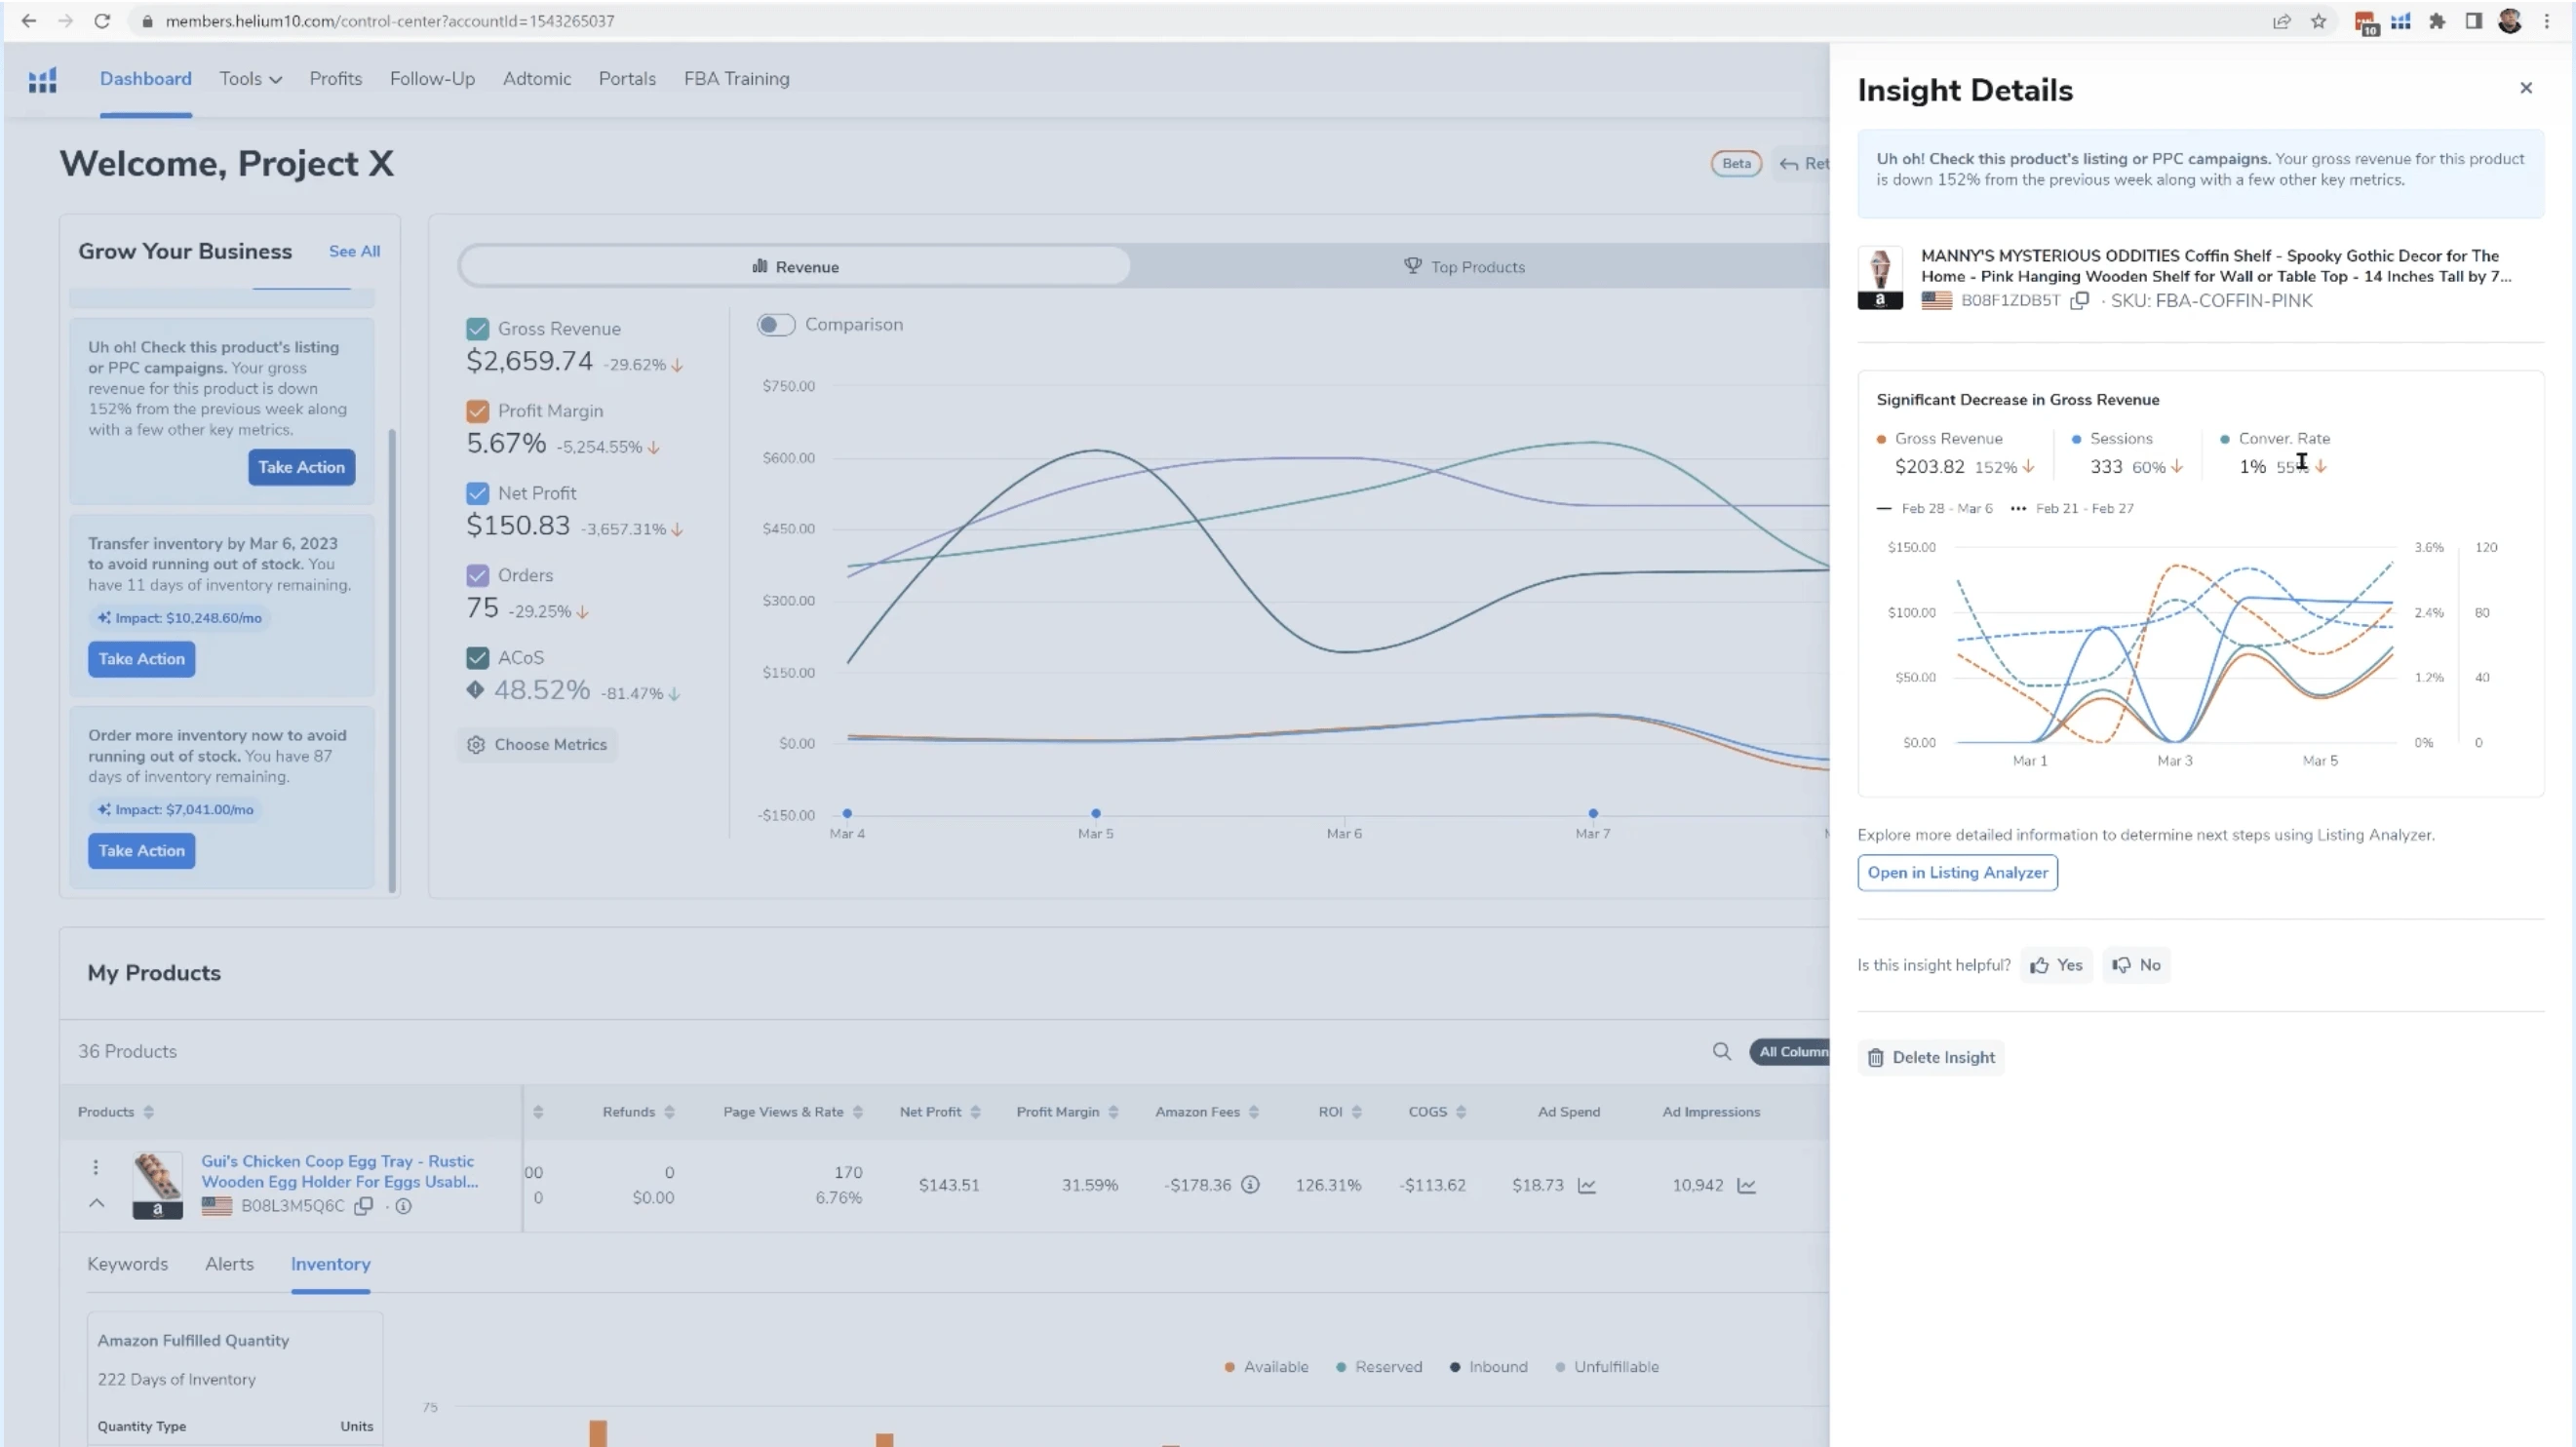 Insights Dashboard Overview